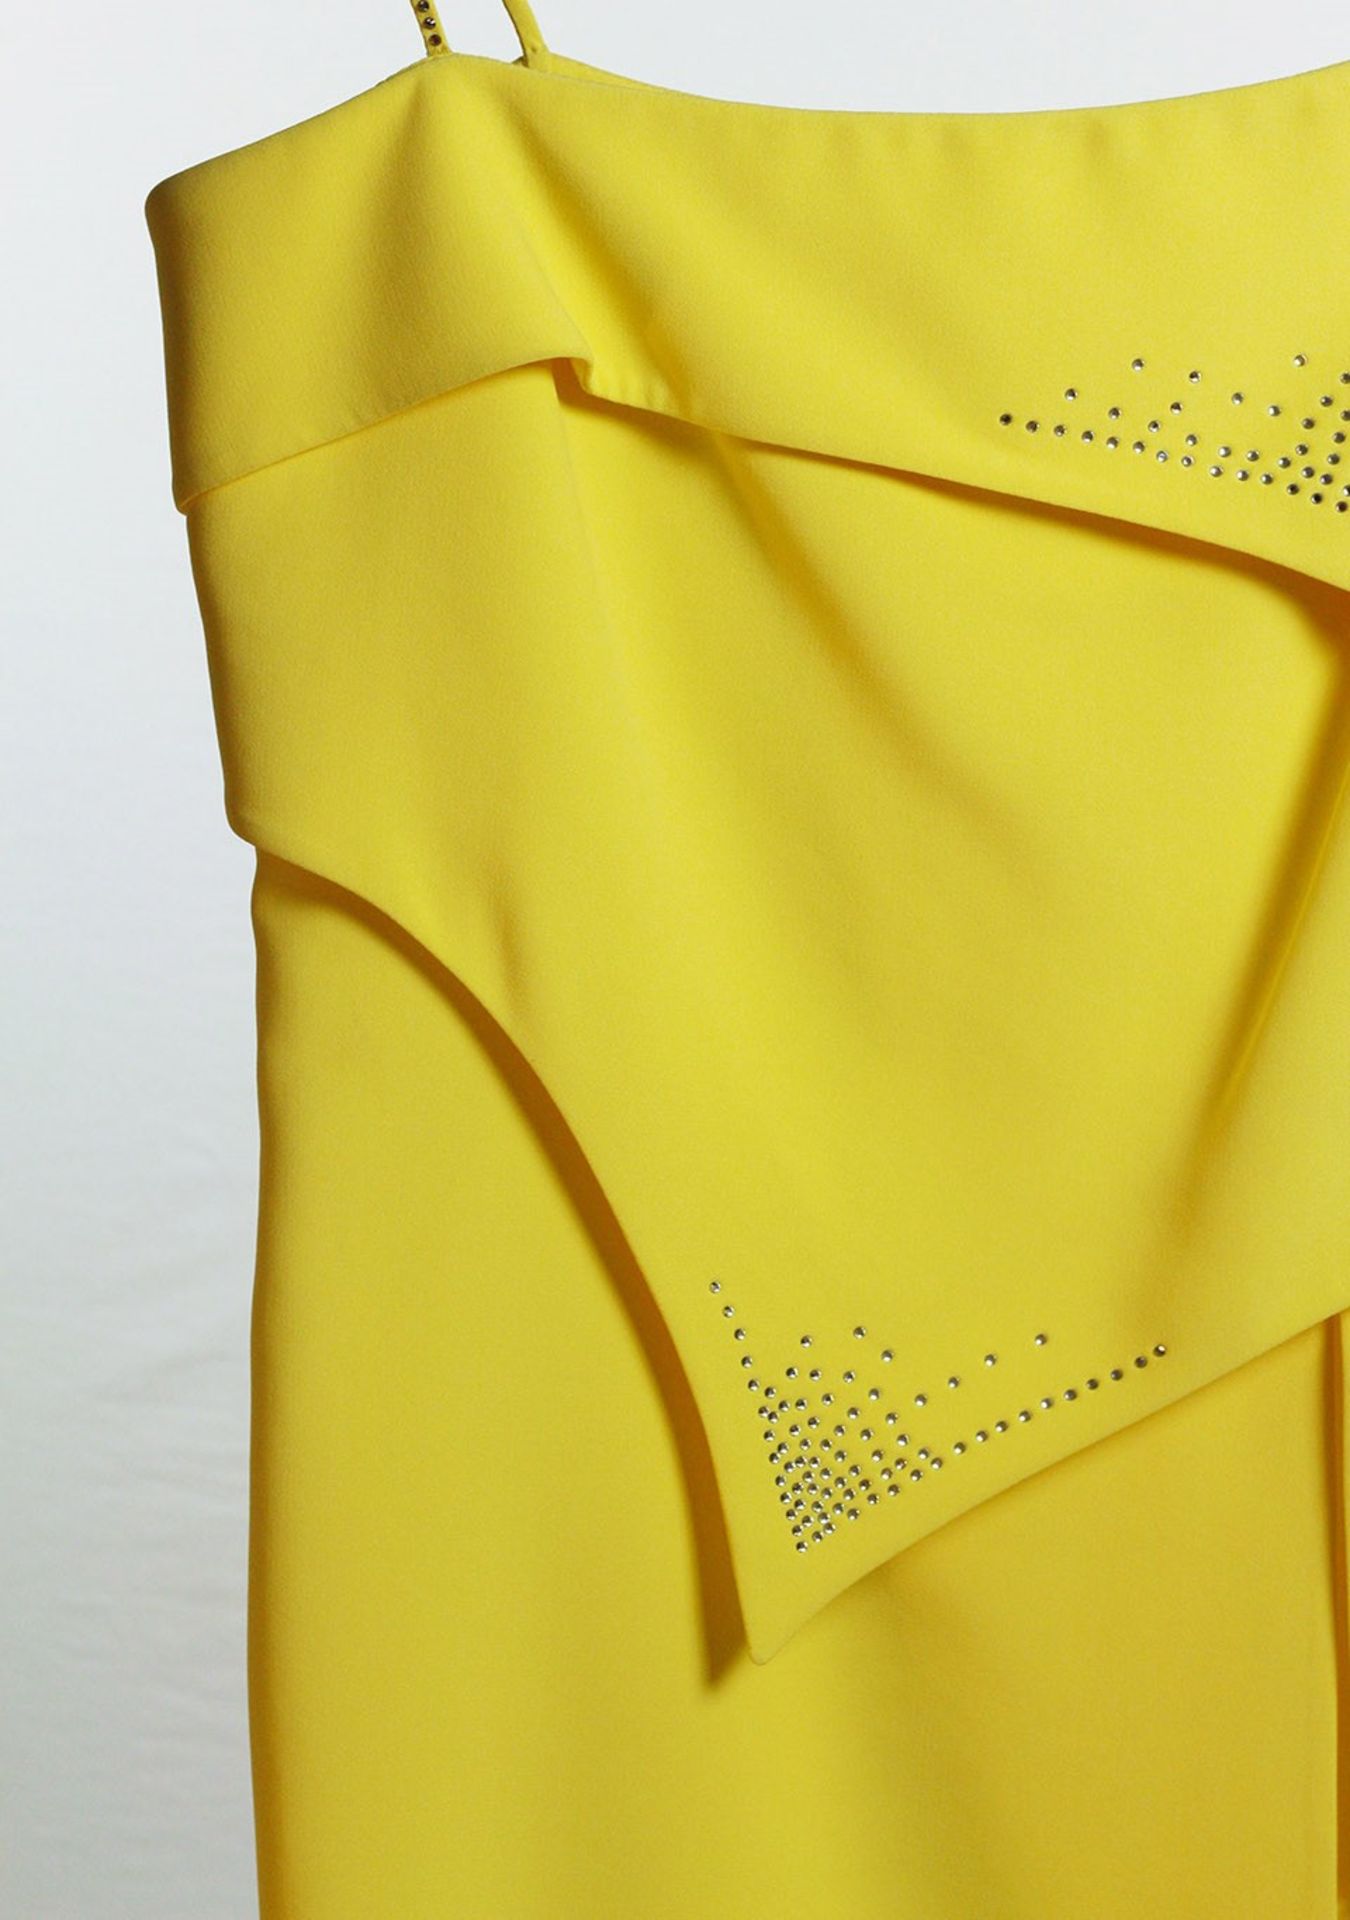 1 x Boutique Le Duc Yellow Dress - Size: 12 - Material: 68% Acetate, 32% Viscose - From a High End - Image 5 of 14